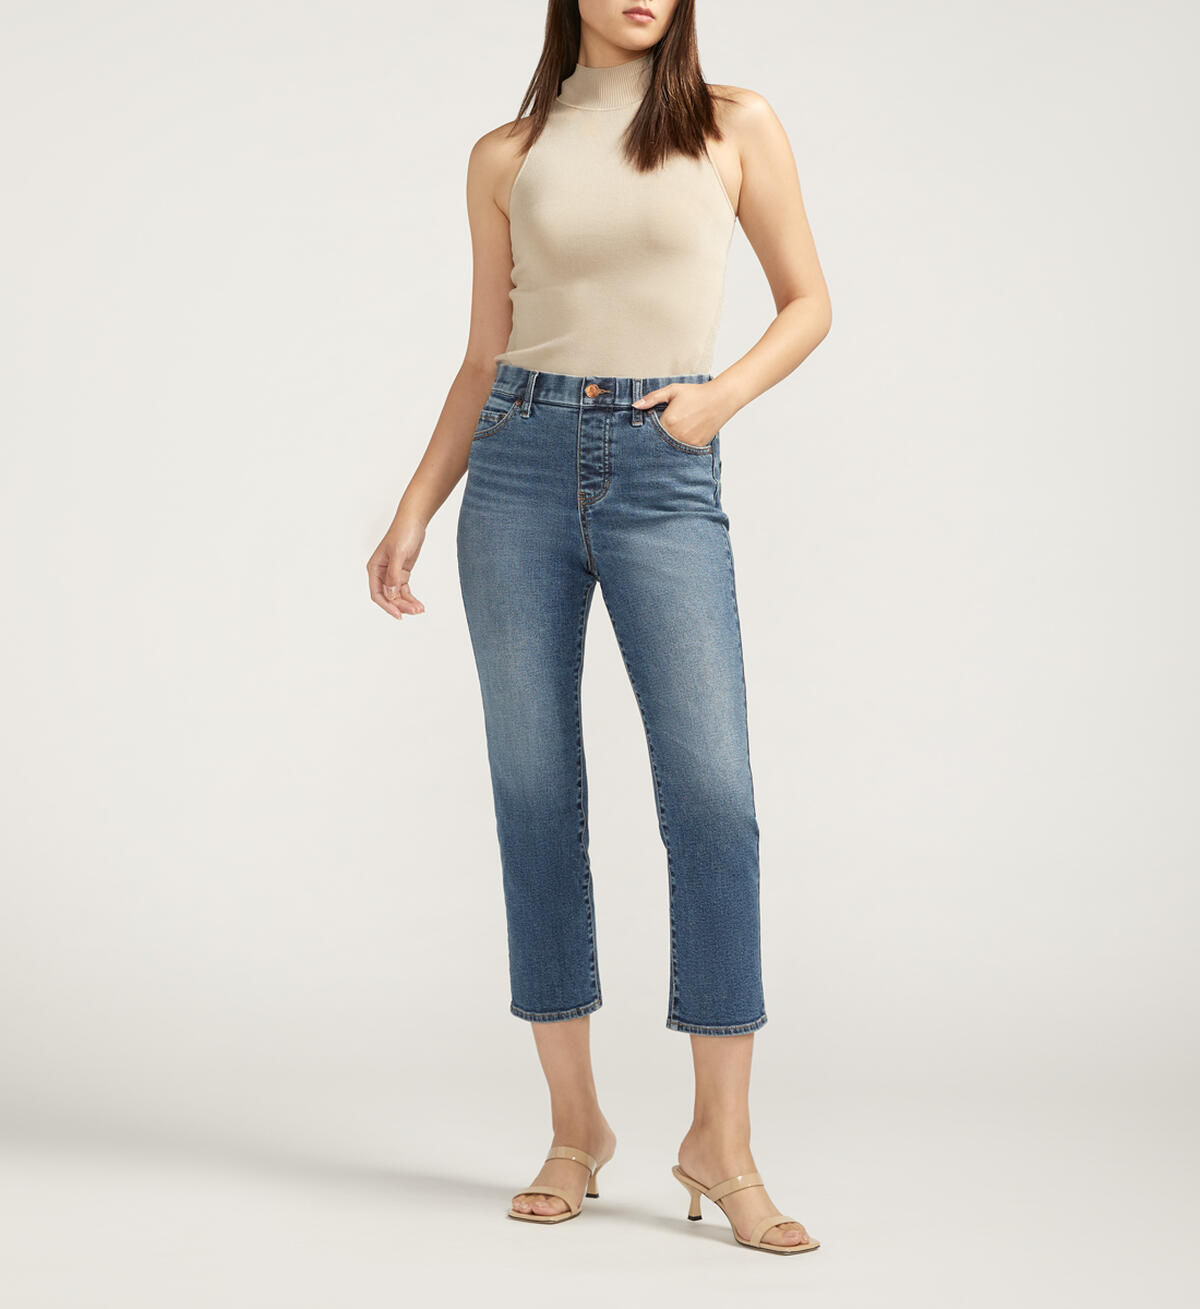 Valentina High Rise Straight Leg Cropped Jeans, , hi-res image number 0